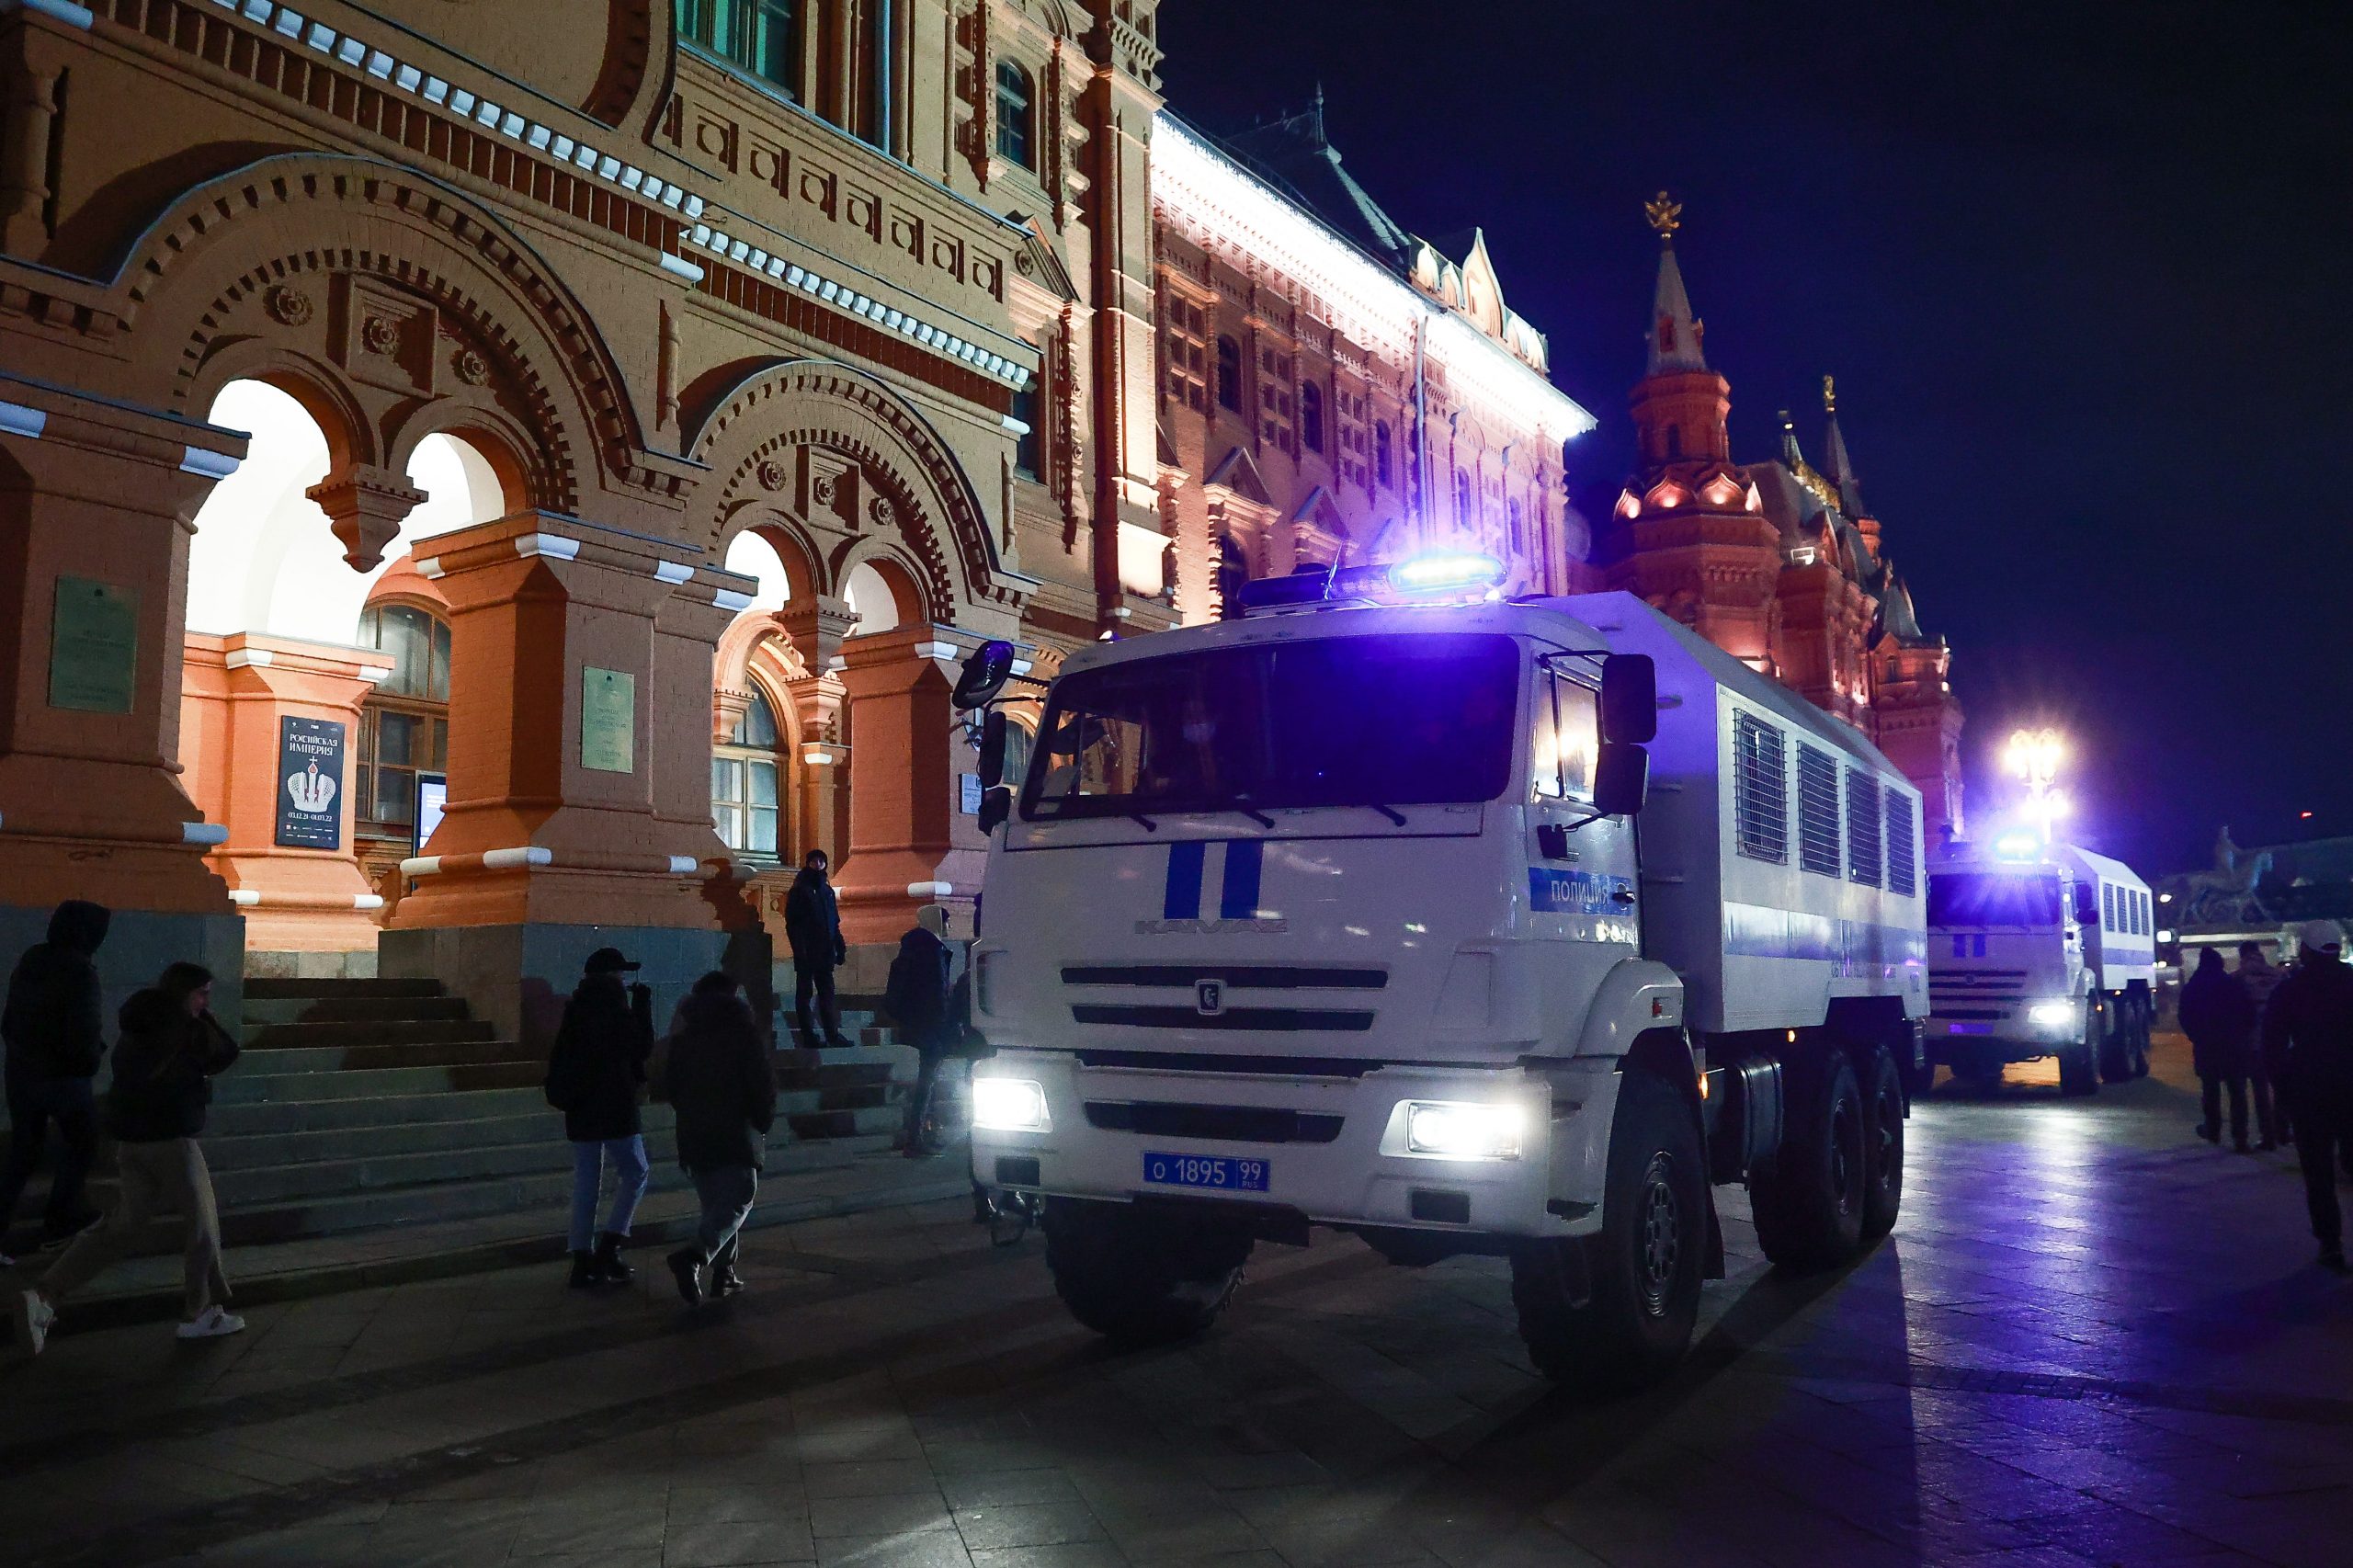 A police vehicle on a street in Moscow at night, during an unauthorized protest.